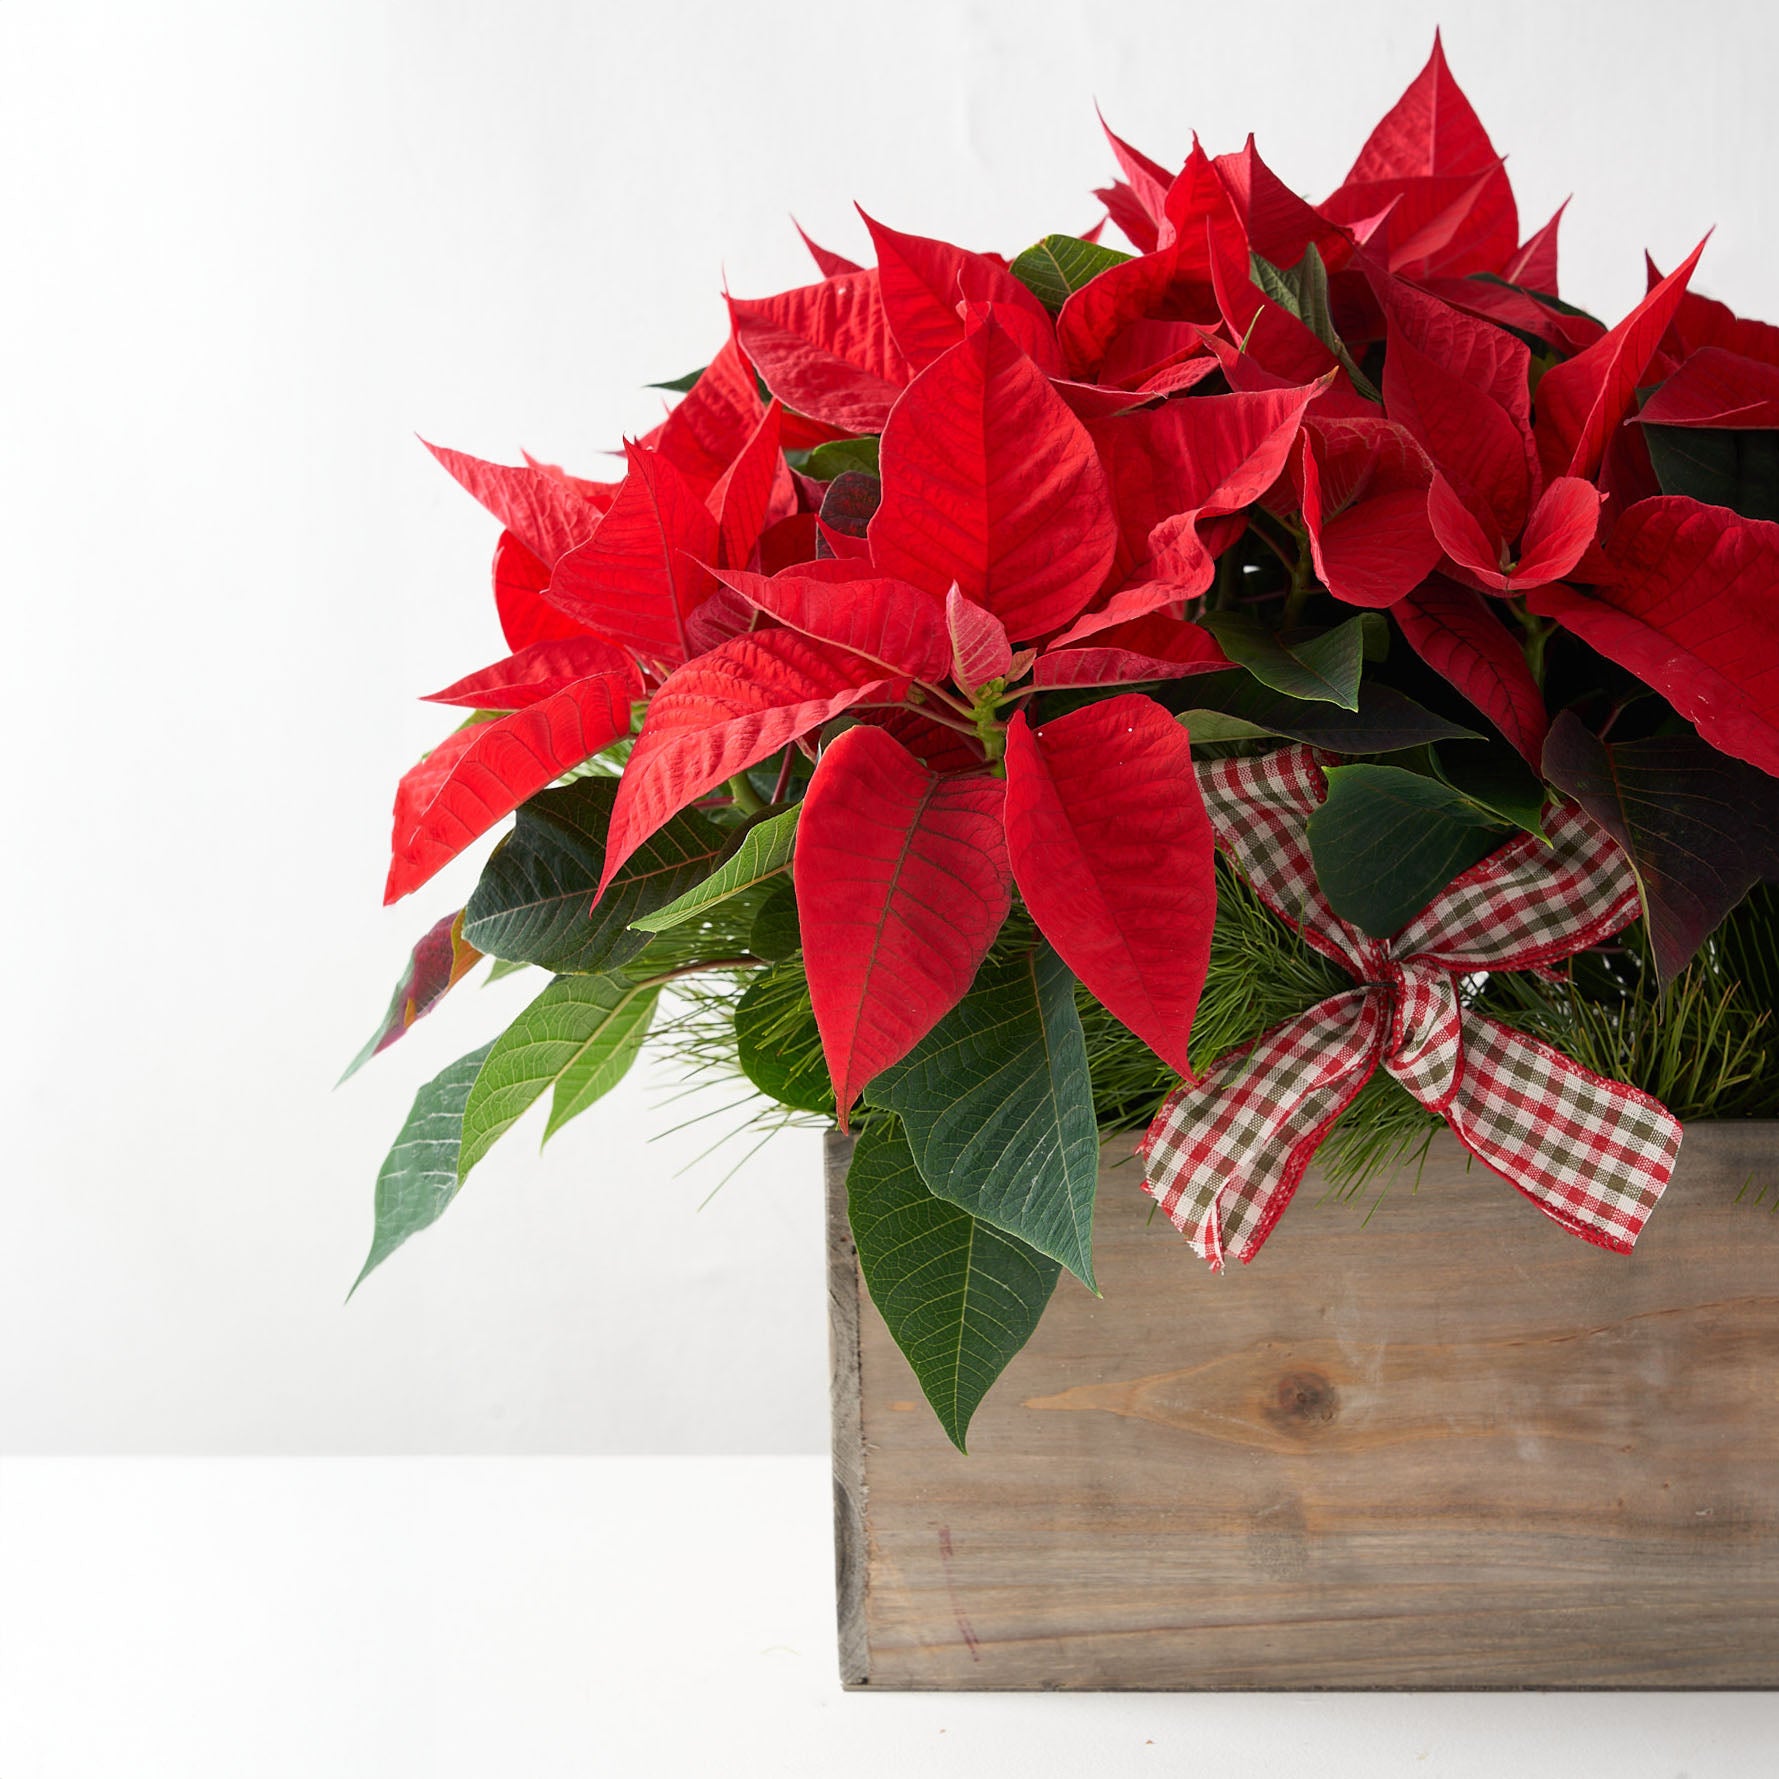 Red poinsettia in wooden box with red and green plaid ribbon and pine.